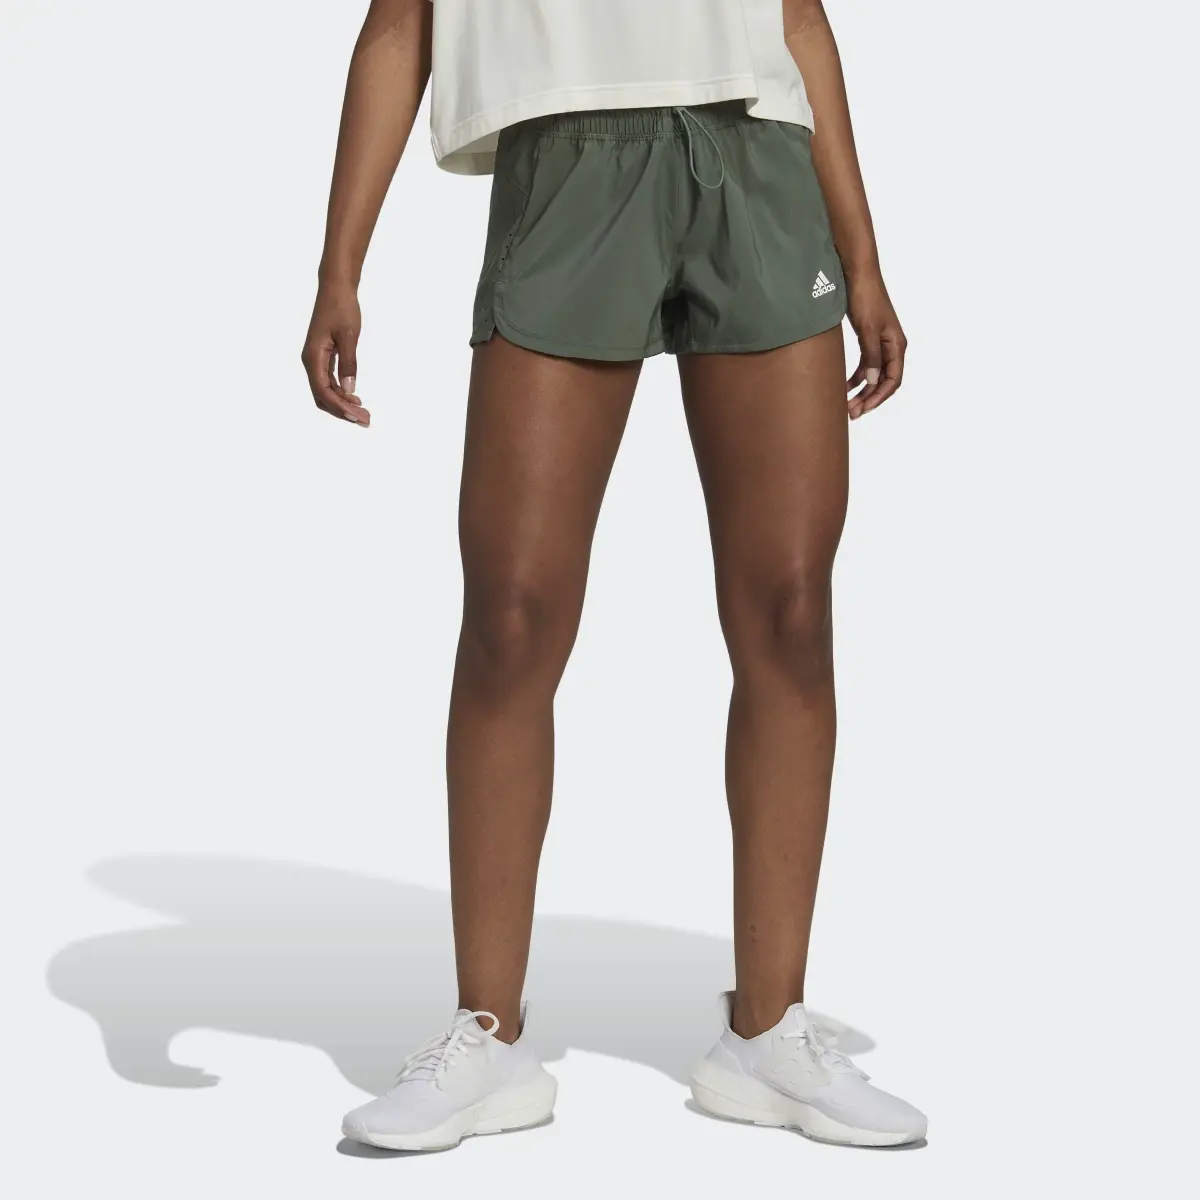 Adidas Perforated Pacer Shorts. 1